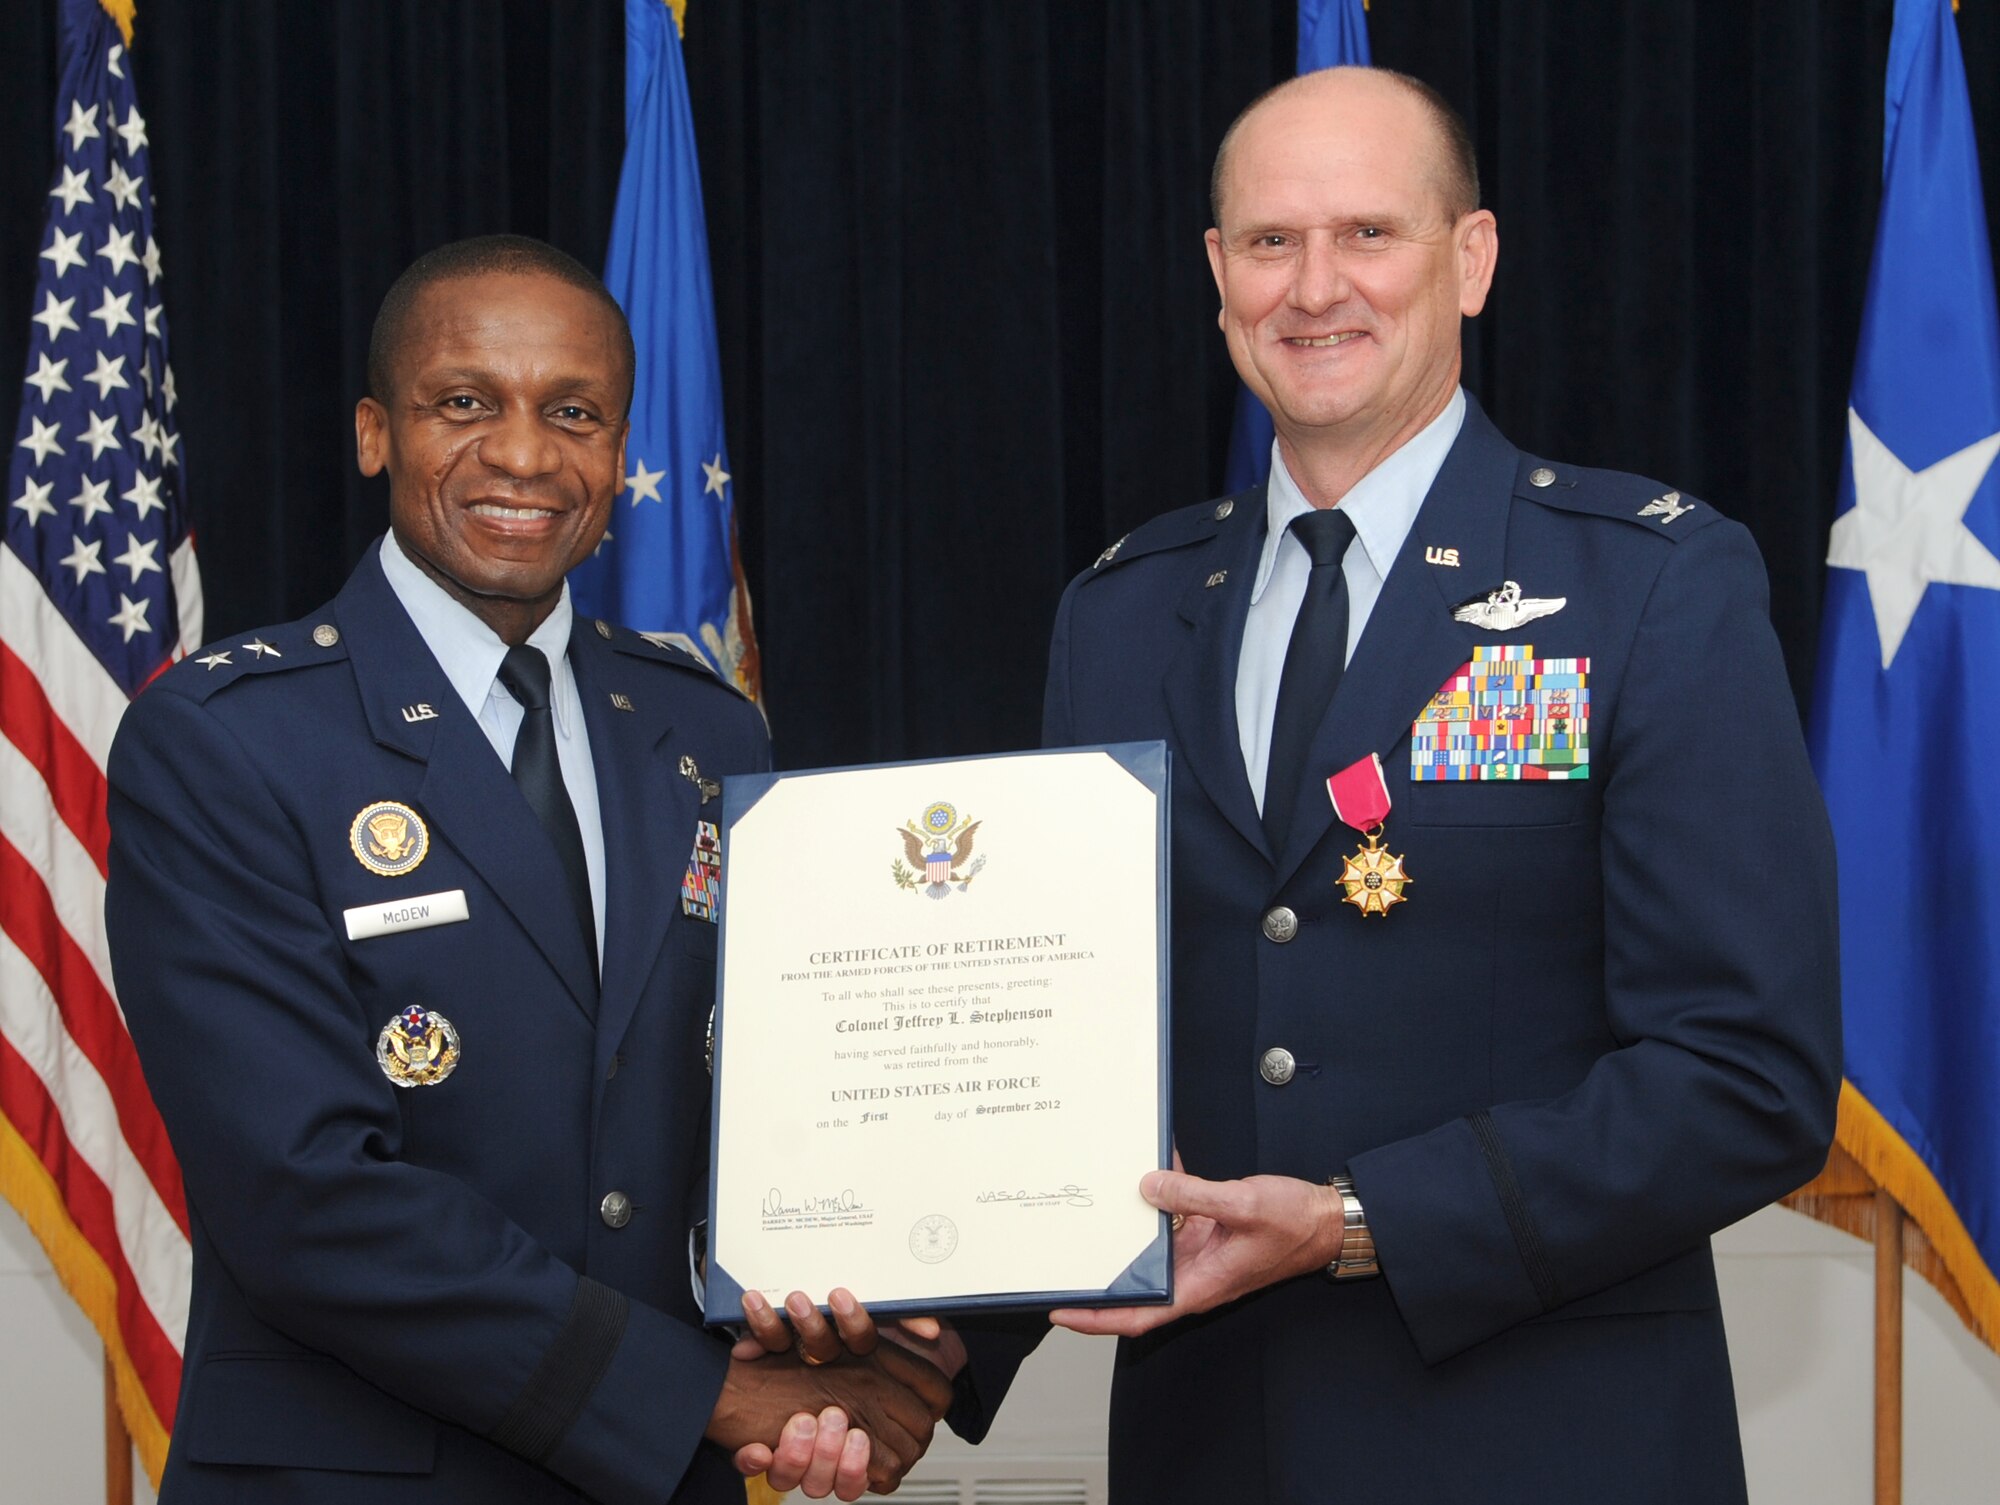 Air Force District of Washington Commander Maj. Gen. Darren W. McDew presents AFDW Vice Commander Col. Jeffrey L. Stephenson his certificate of retirement June 28, 2012 on Joint Base Andrews, Md. Stephenson spent his final year in uniform leading the Airmen of AFDW.